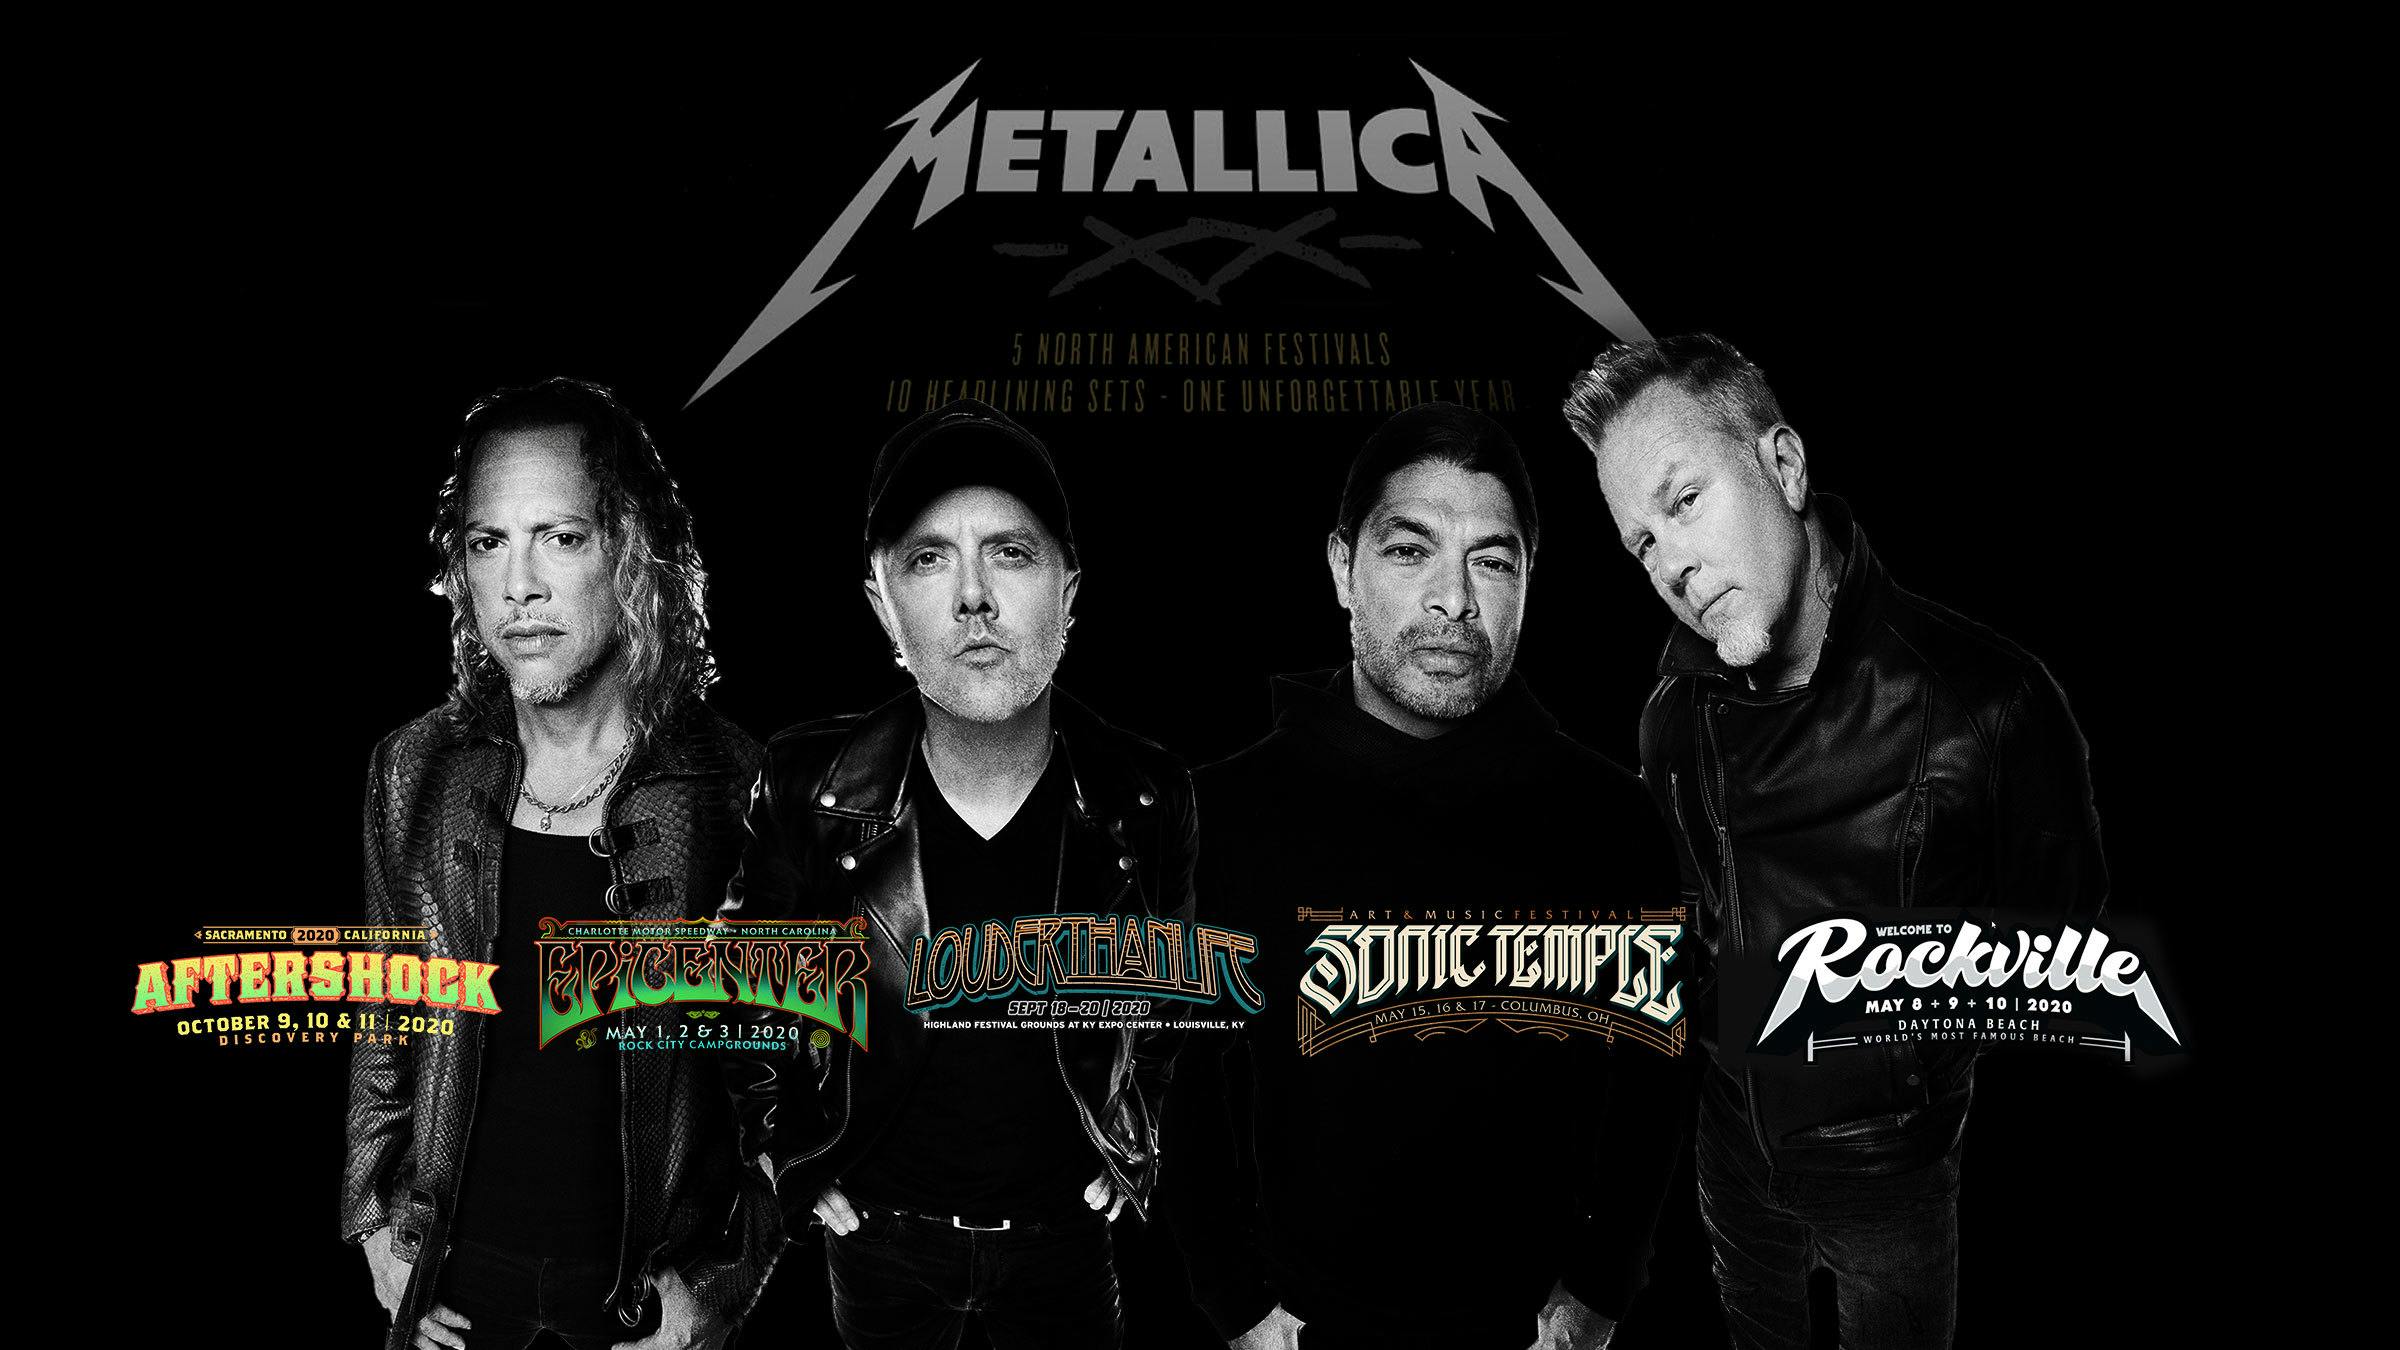 Metallica Announce Two Headlining Sets At Every Danny Wimmer Festival Of 2020